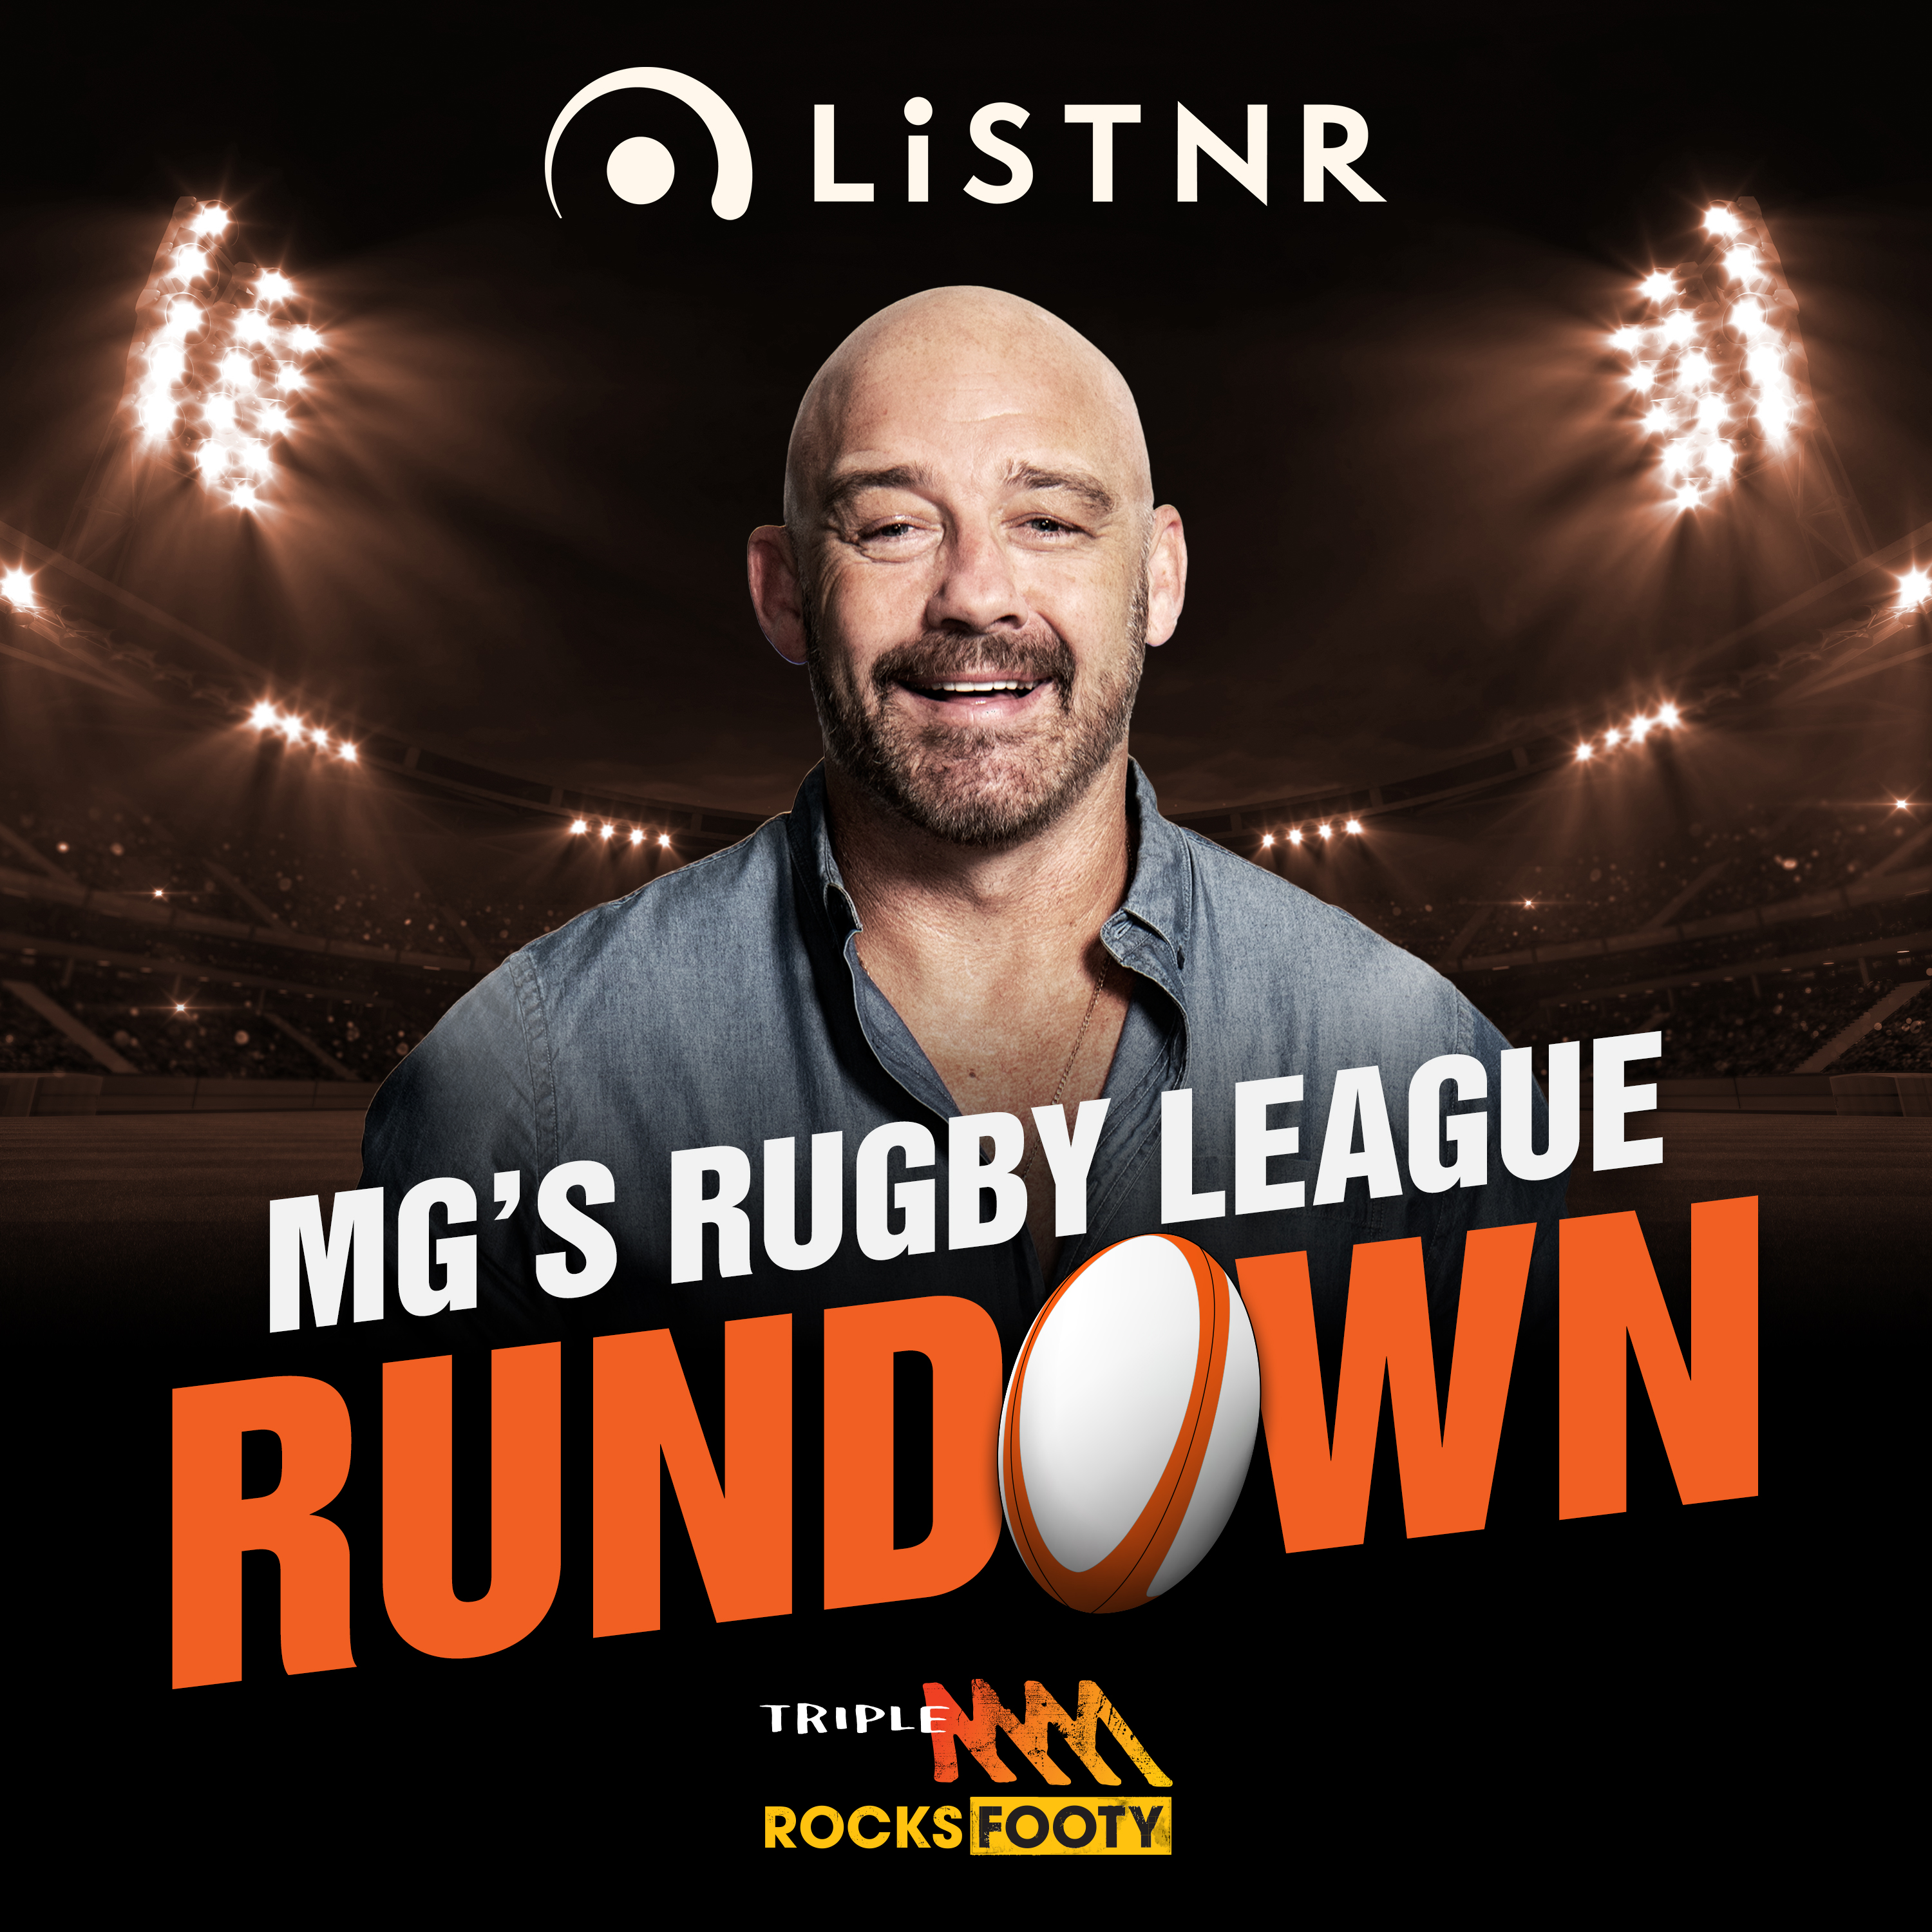 MG's Rugby League Rundown | The Club MG Would Love To See Chase Taumalolo, Does Christian Welch Injury Ruin The Storm's Premiership Chances? Plus MG's Tips For Every Game!